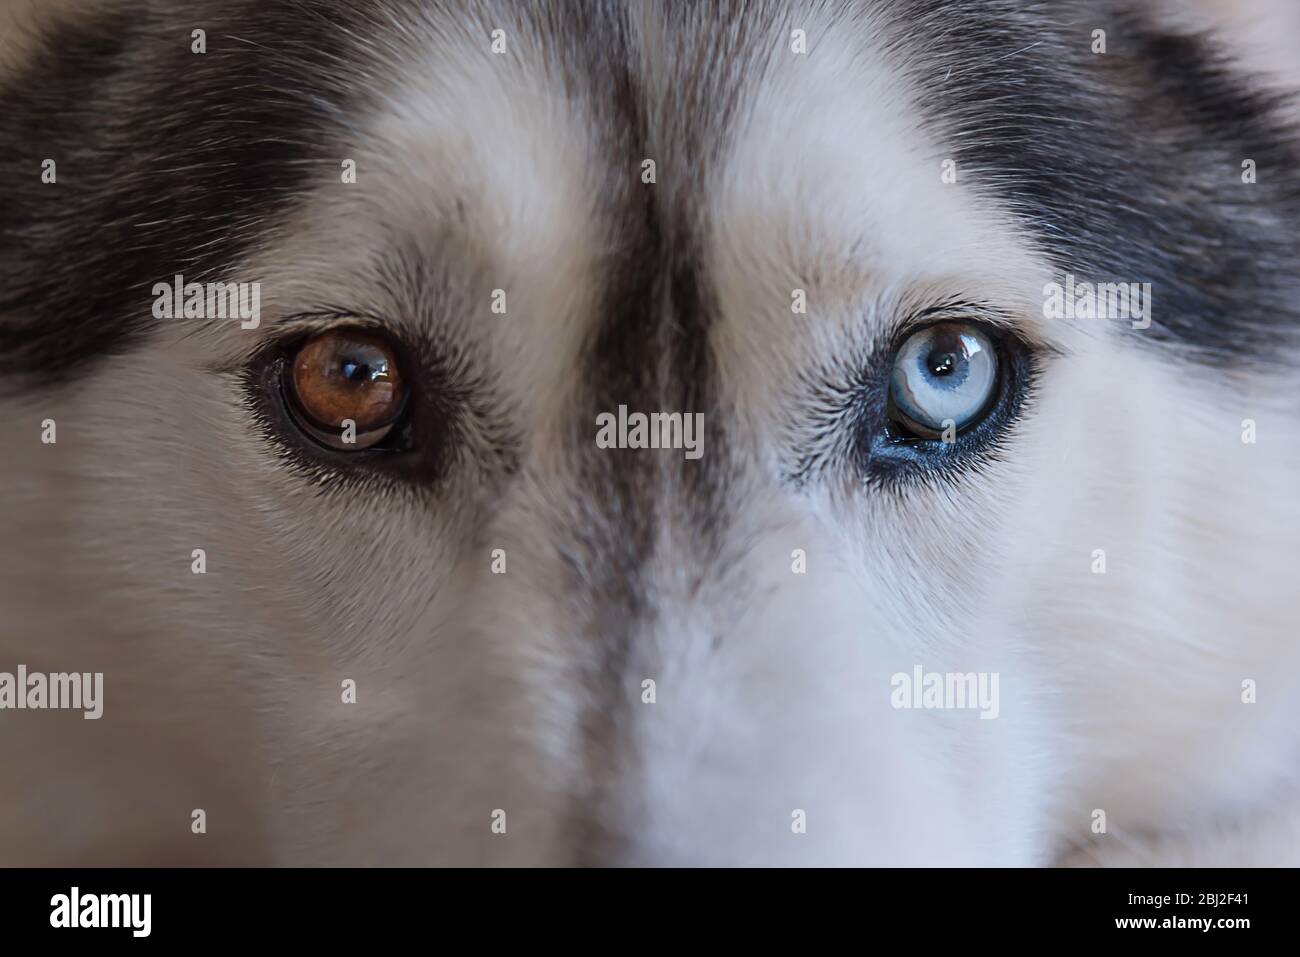 dog that looks like a wolf with blue eyes